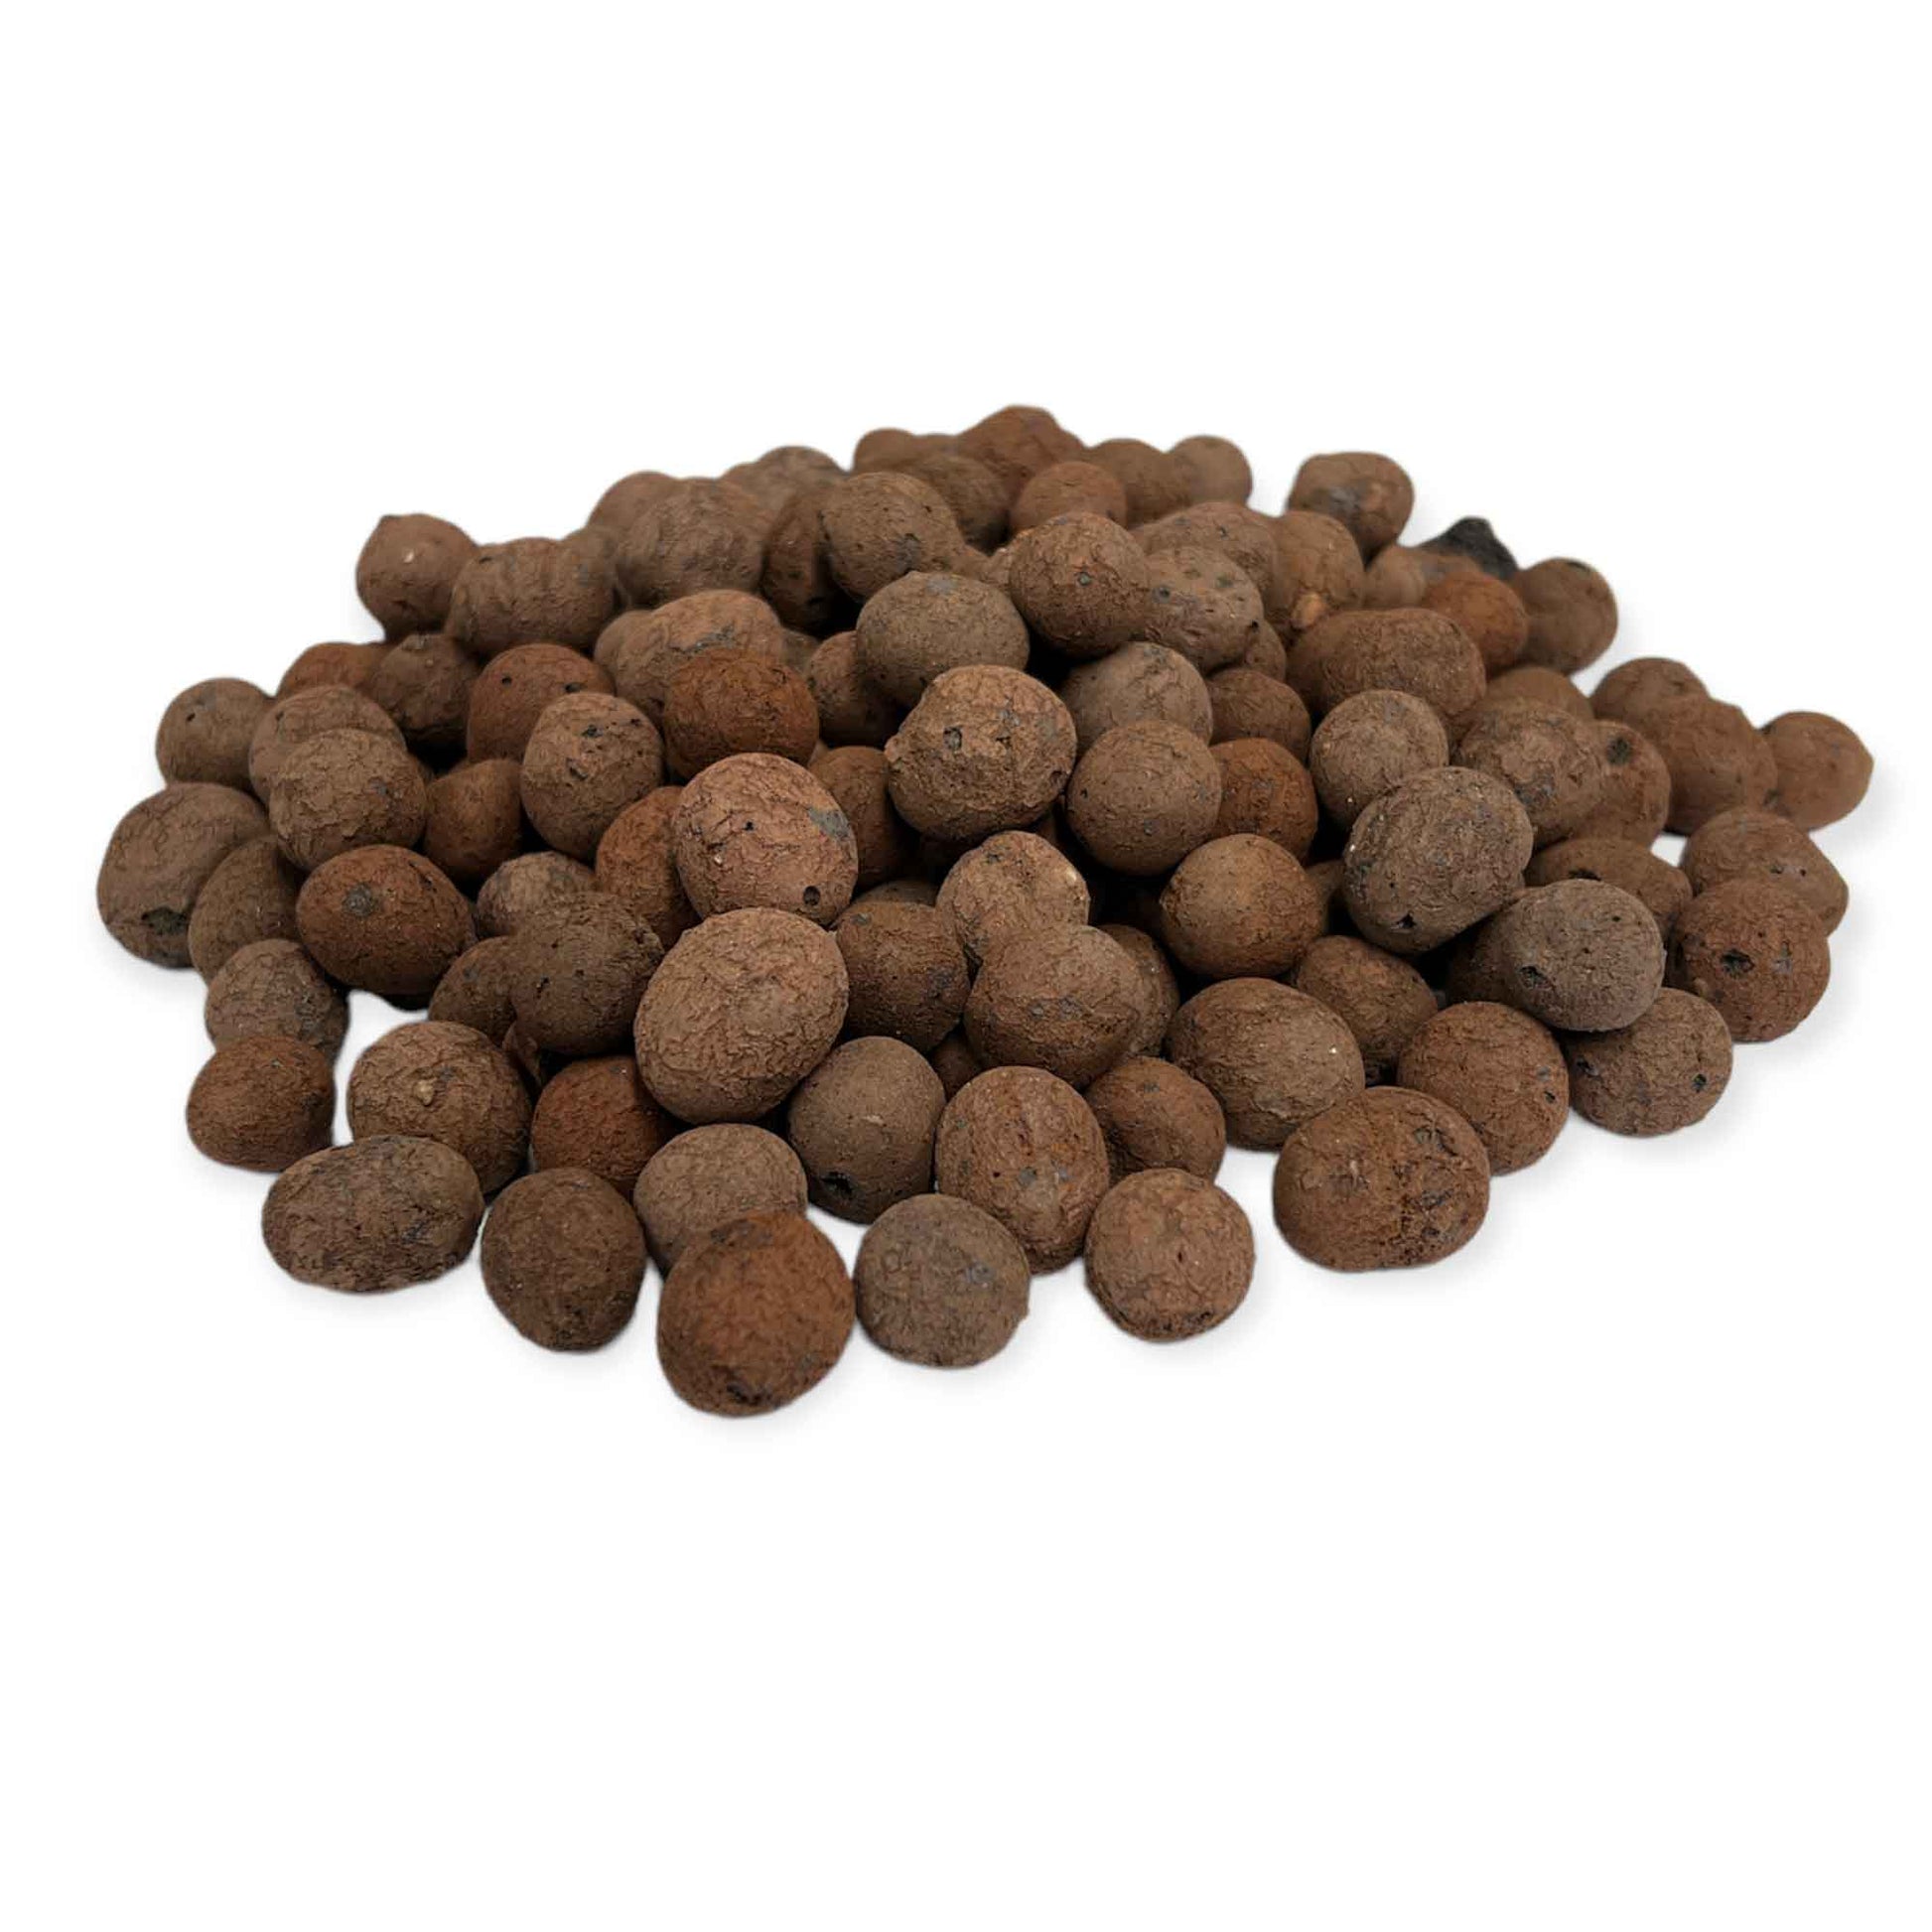 1L Expanded Hydro Clay Balls - Hydroponic Pebbles Plant Growing Medium Pellets